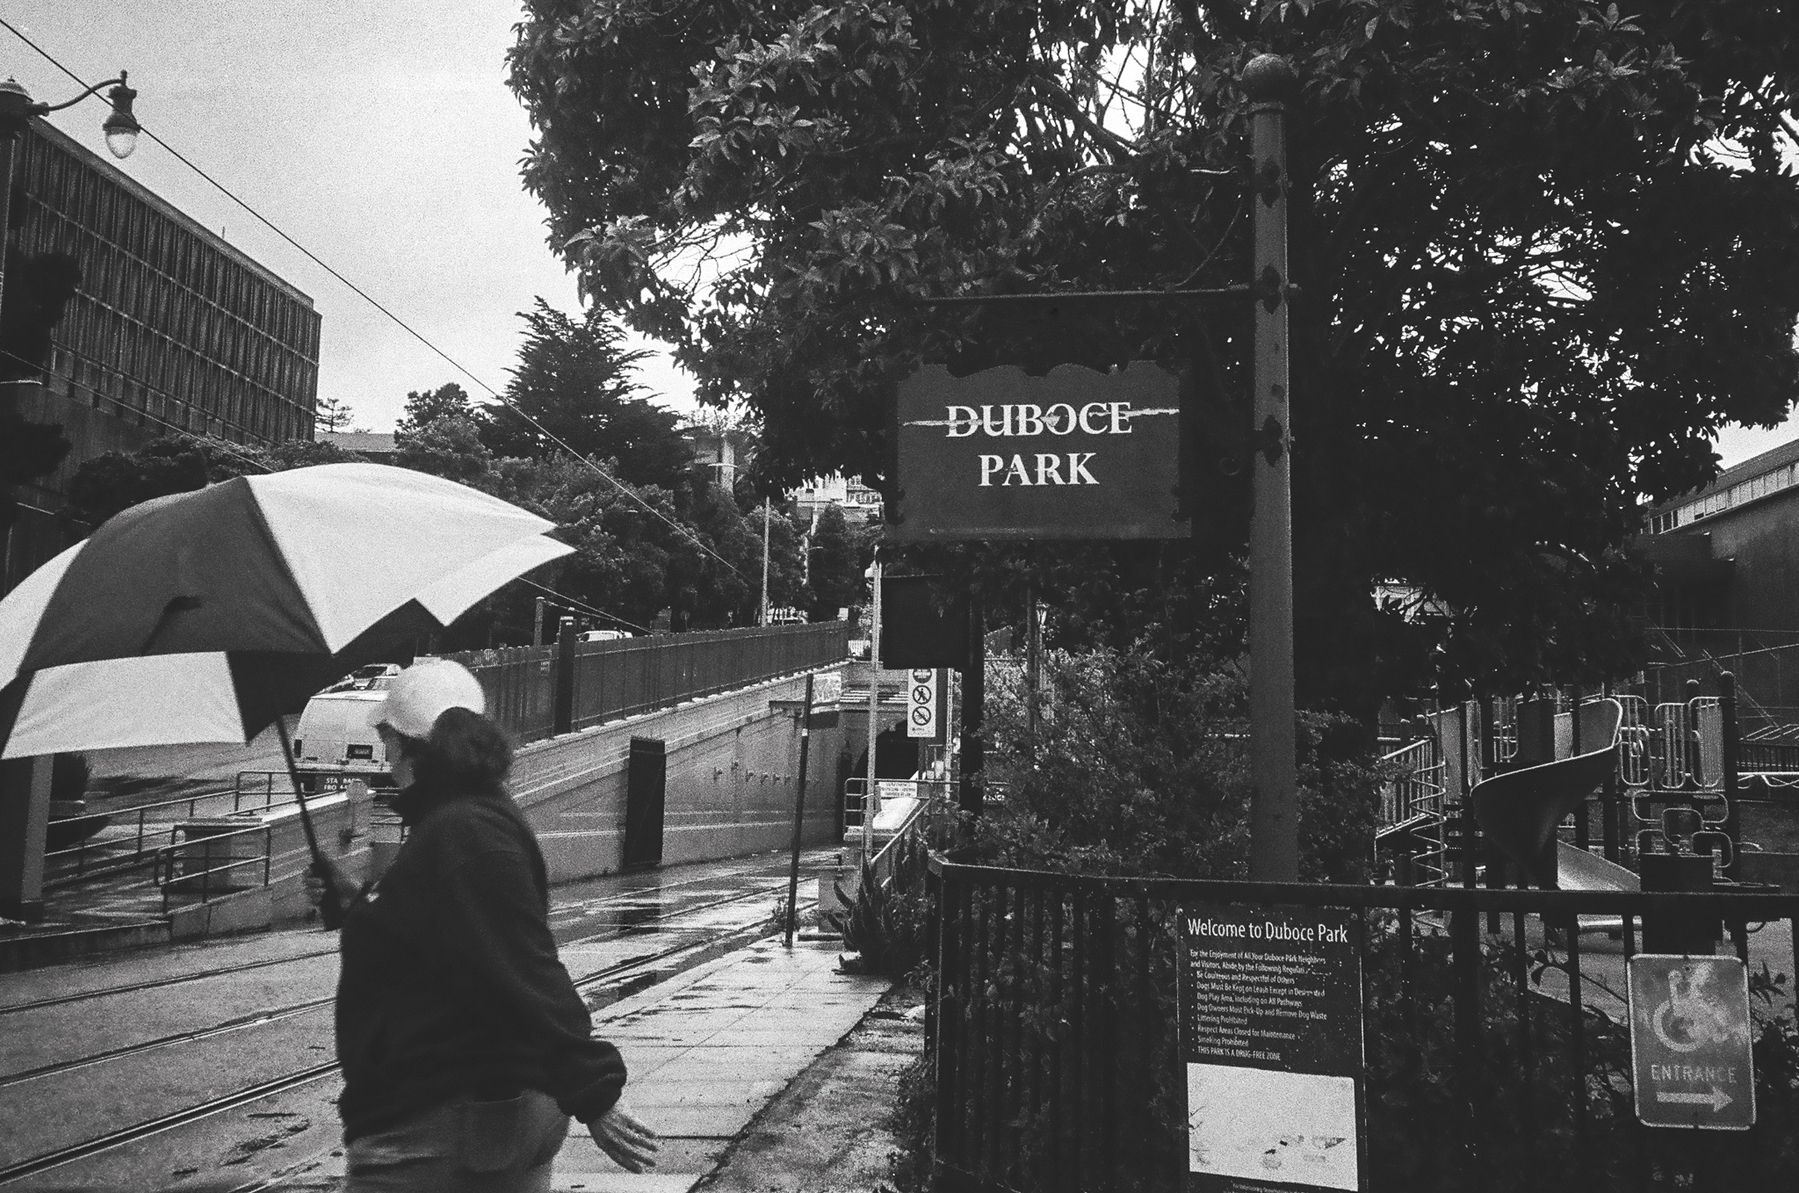 a scan of a black and white photograph of woman holding an umbrella standing at Duboce Park waiting for a train in the rain